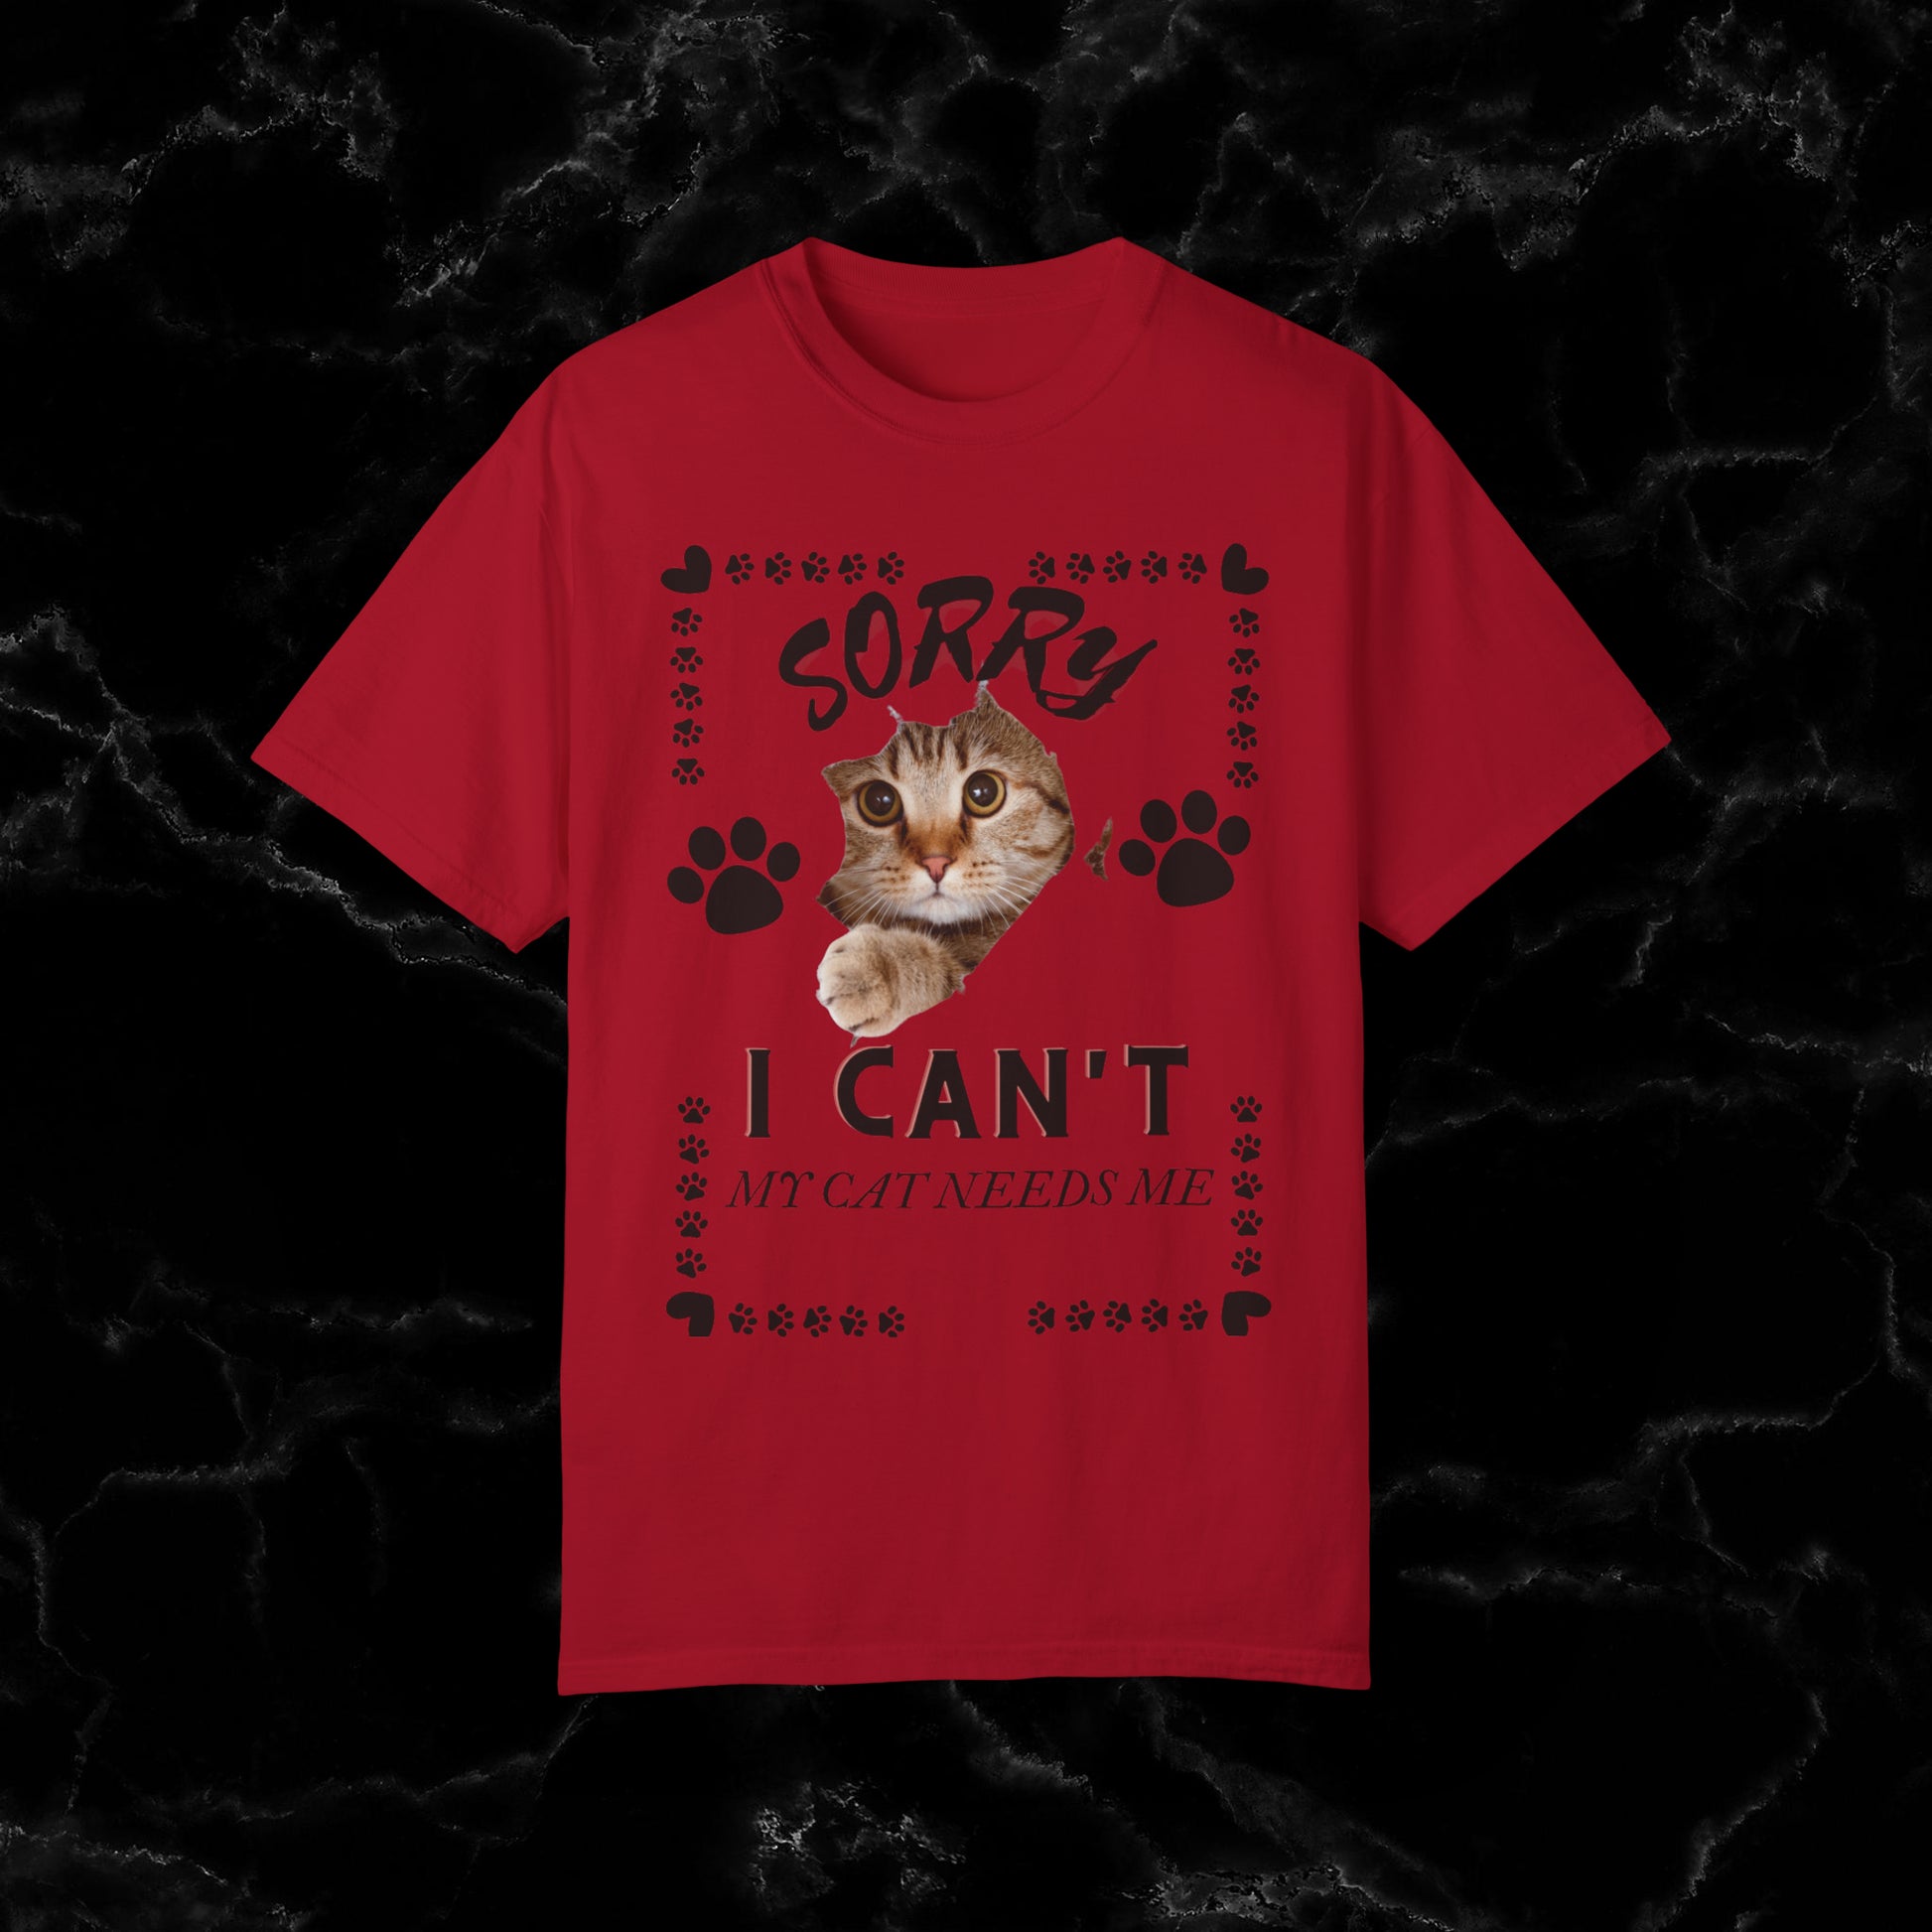 Sorry I Can't, My Cat Needs Me T-Shirt - Perfect Gift for Cat Moms and Animal Lovers T-Shirt Red S 